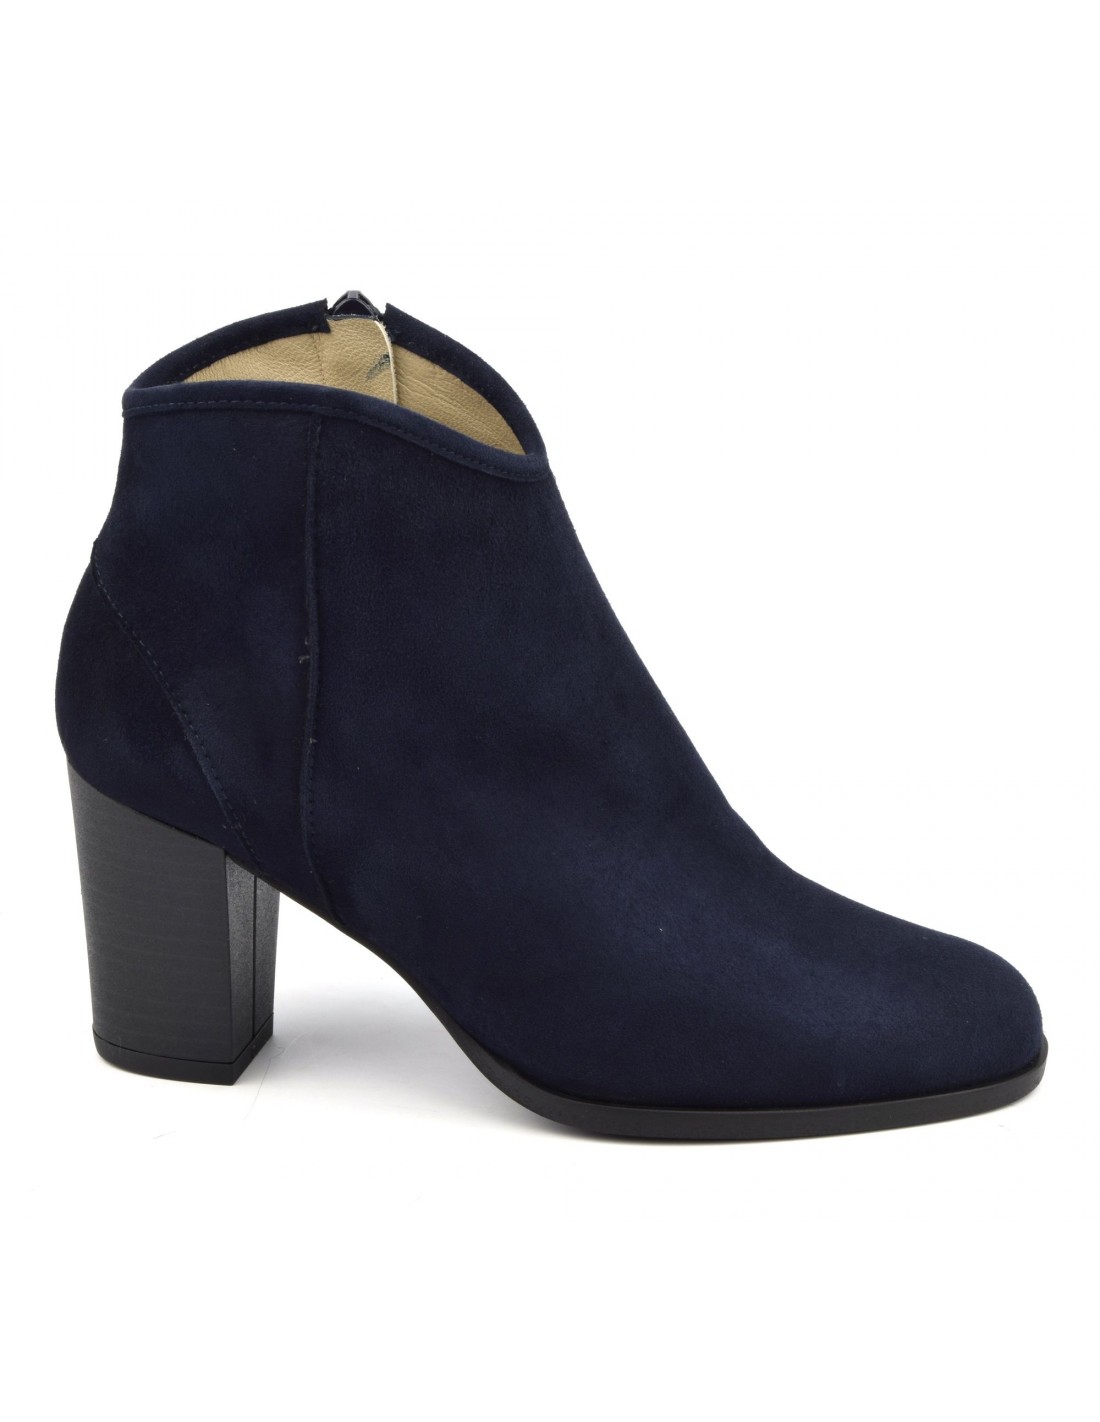 Navy blue suede leather ankle boots, FZ97586, Brenda Zaro